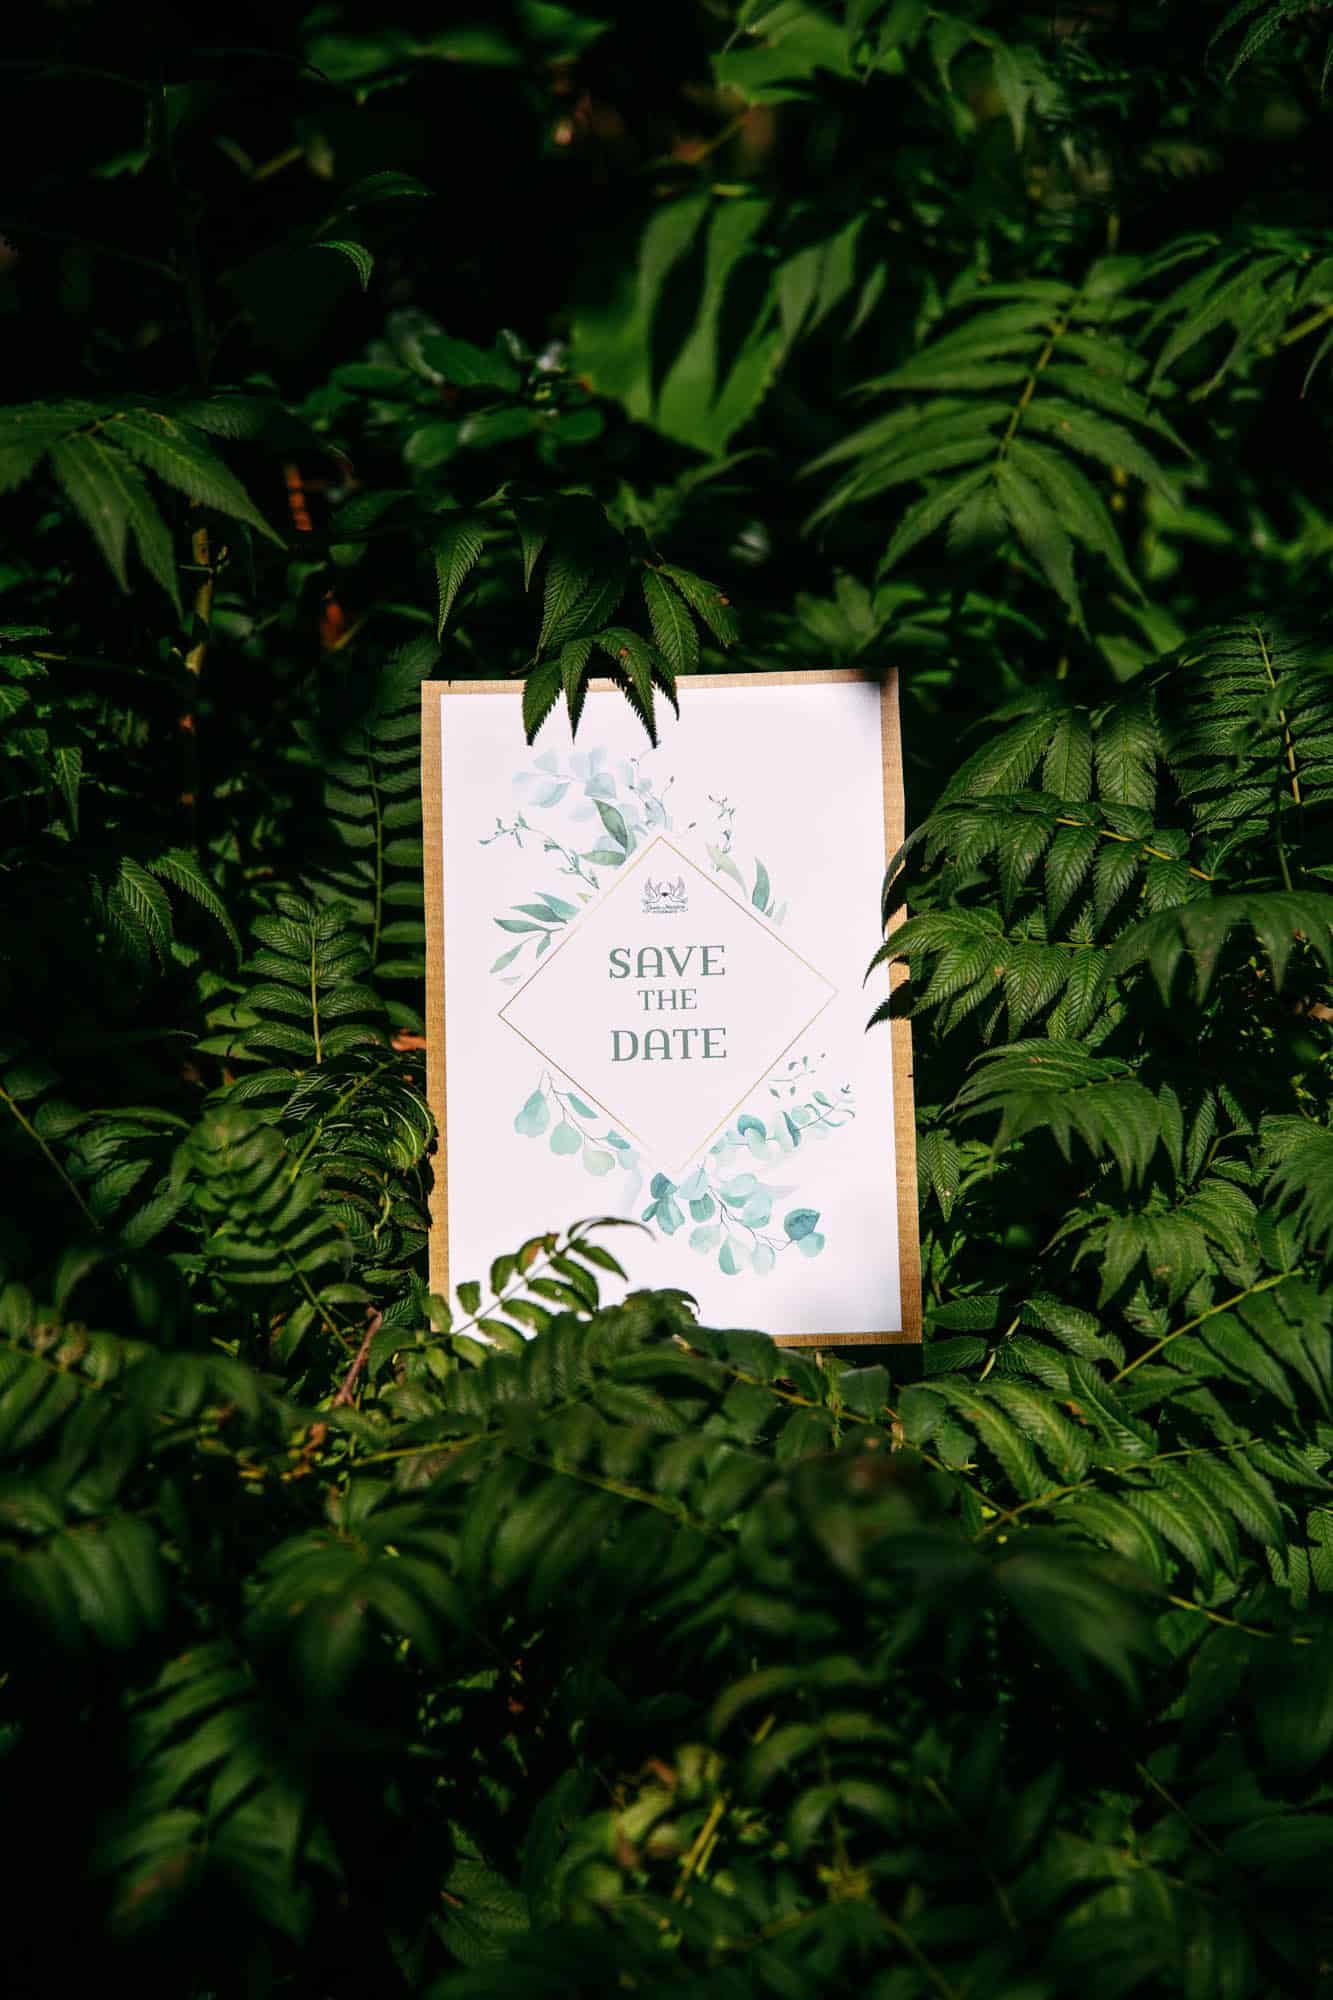 Save the date card in nature